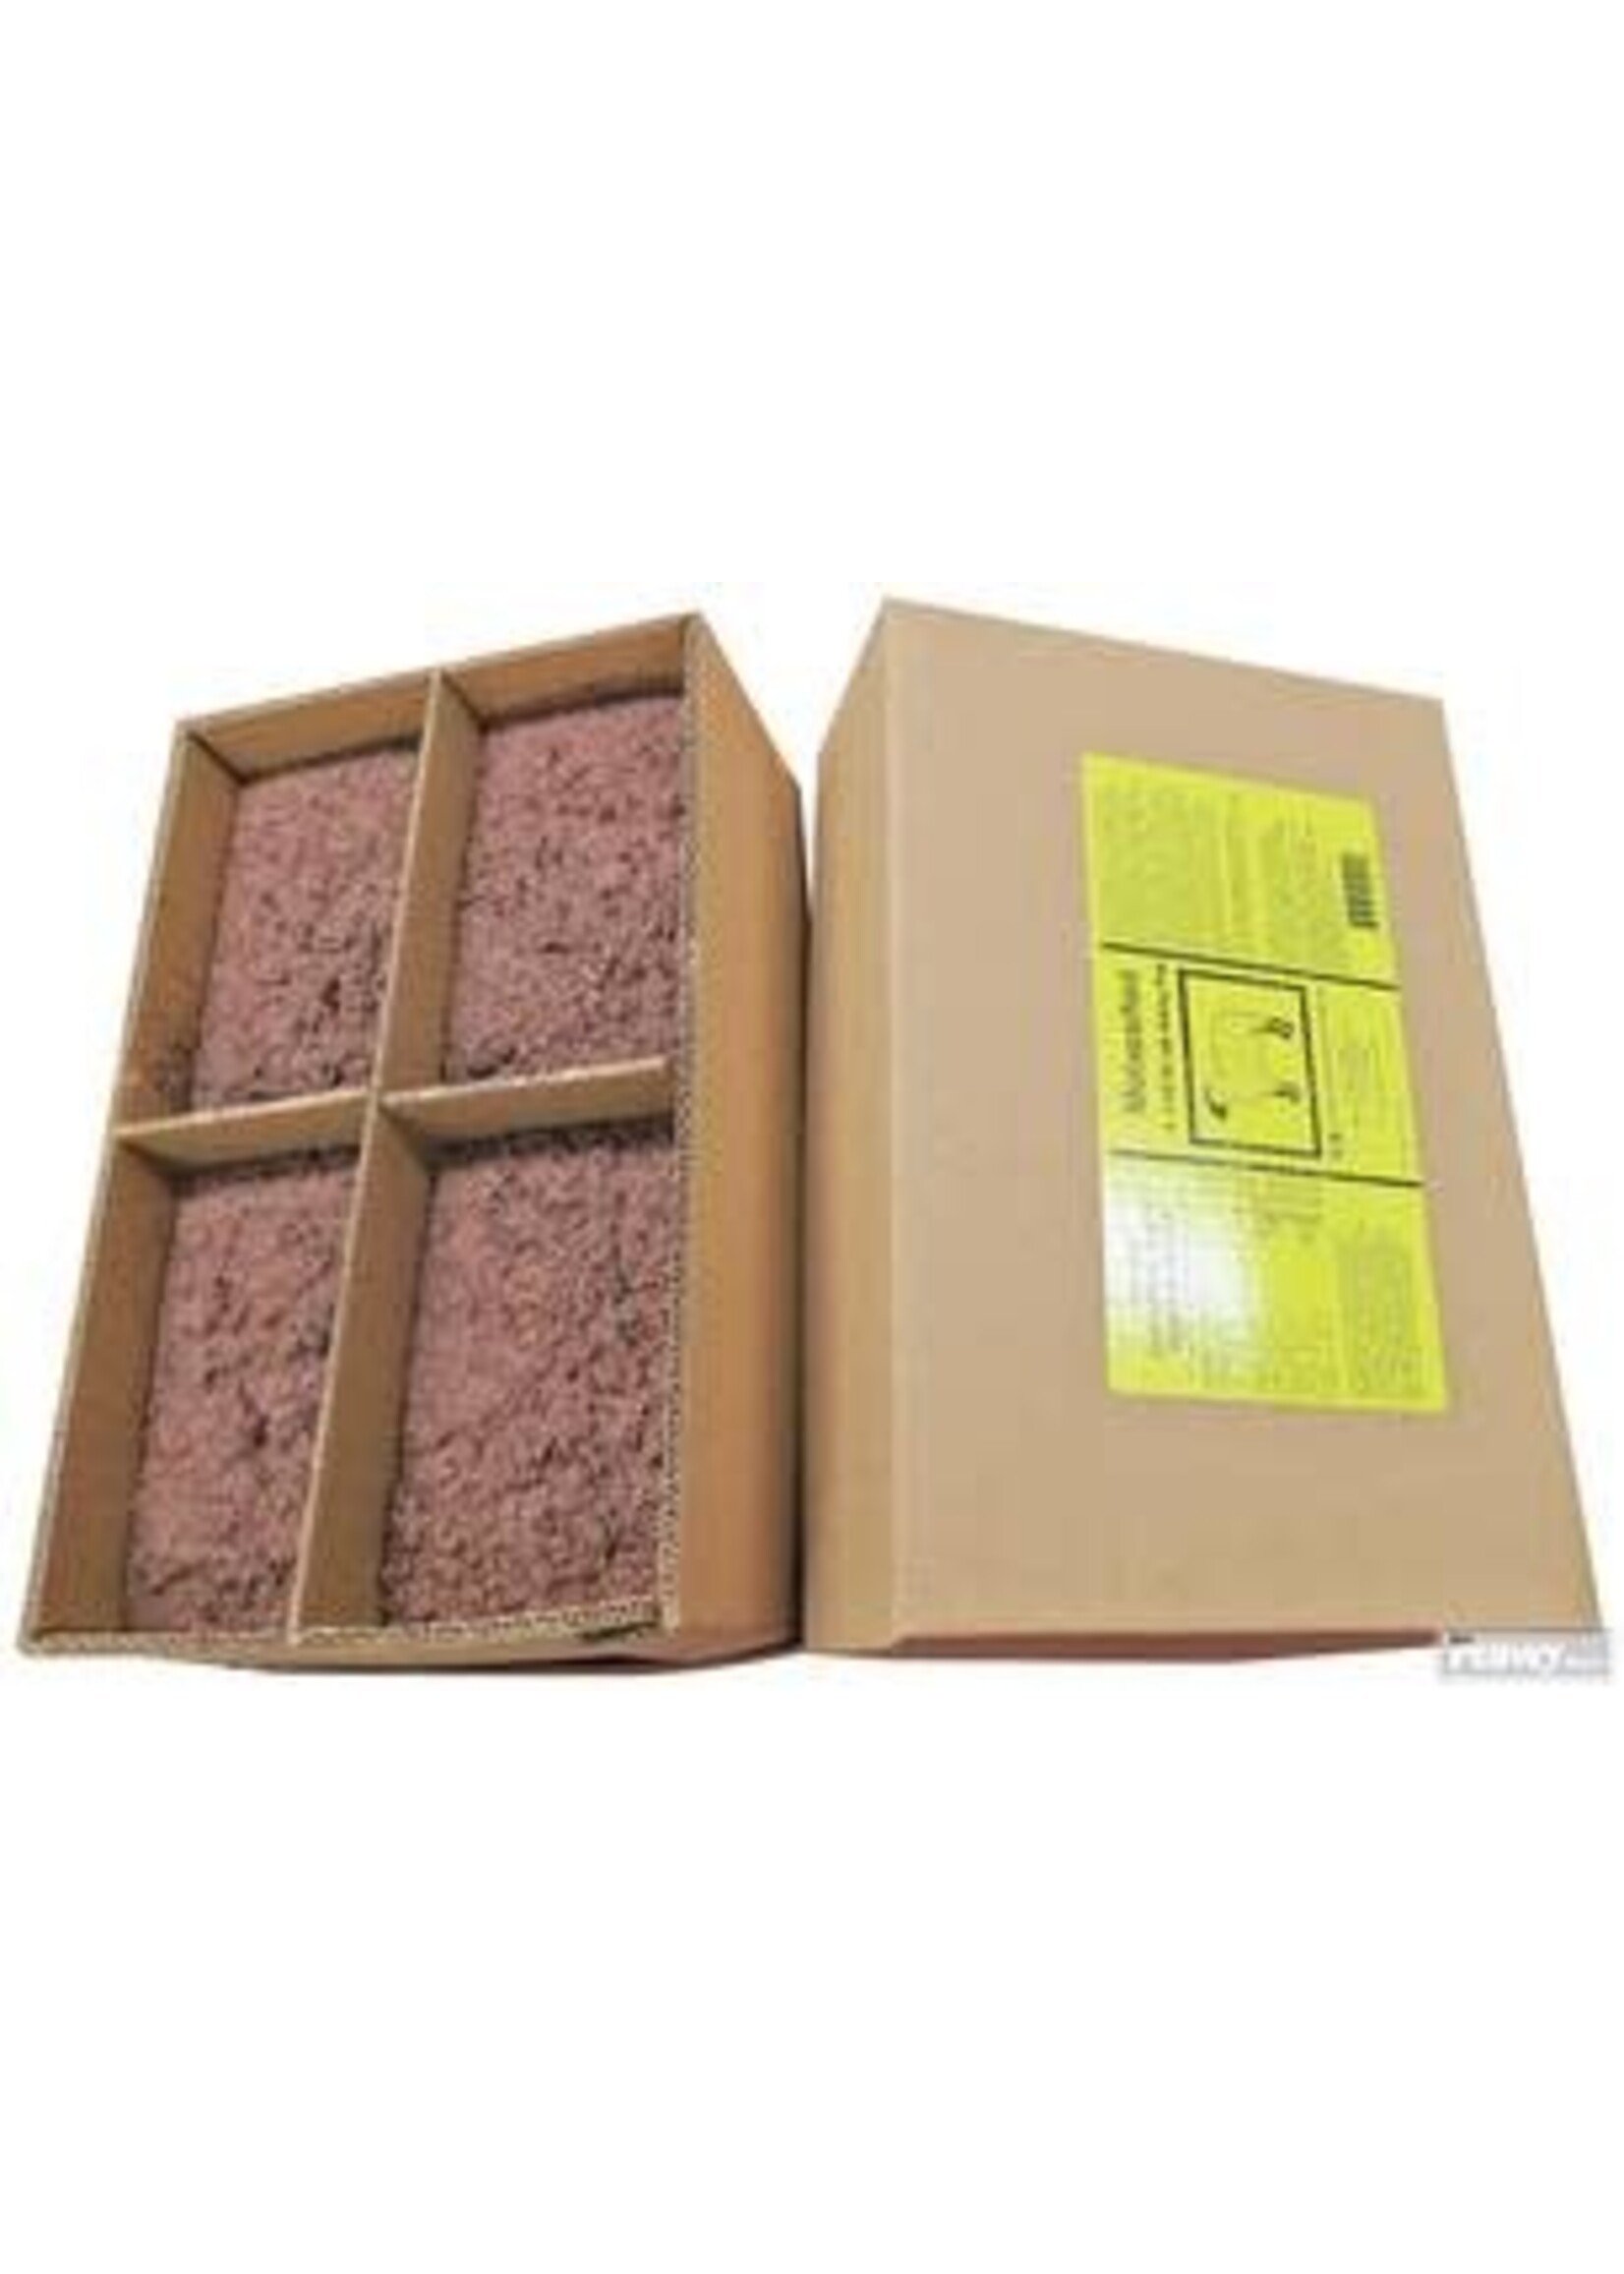 Country Junction CJ - Sheep Mineral Block 4 Cell - 25 kg